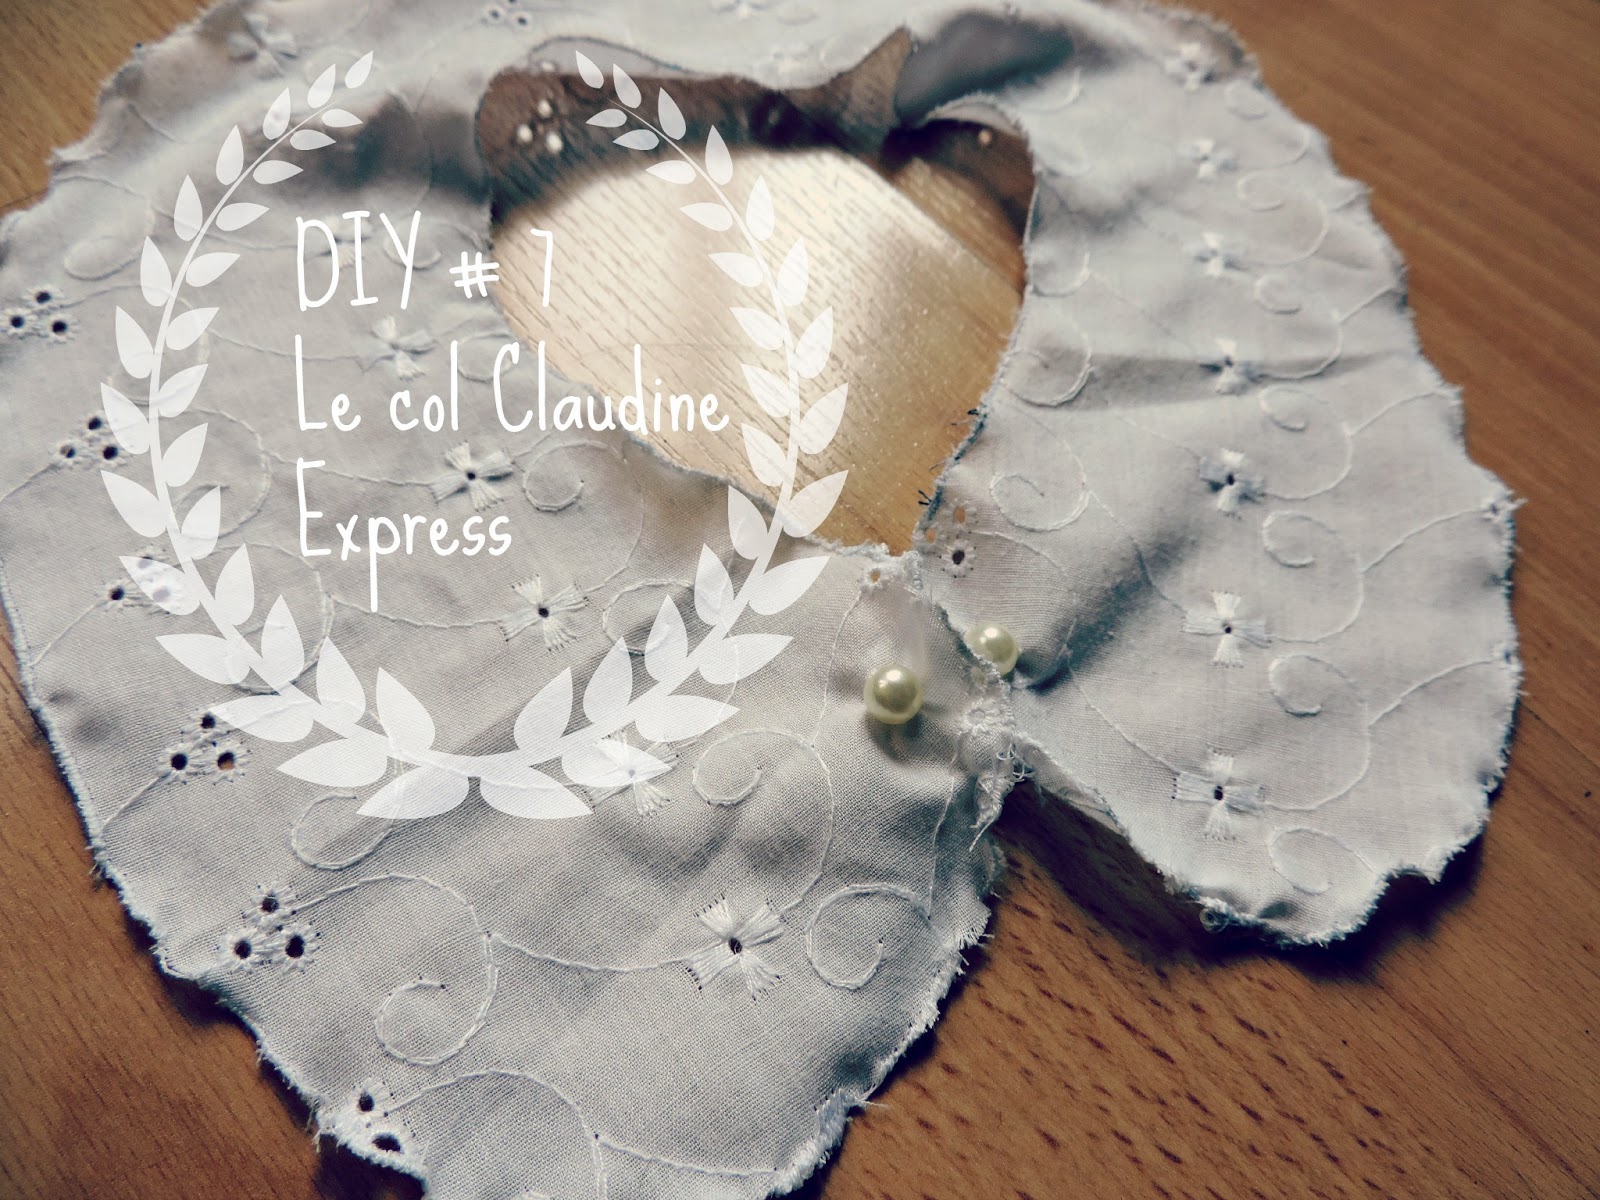 http://mynameisgeorges.blogspot.com/2014/04/diy-7-le-col-claudine-express.html